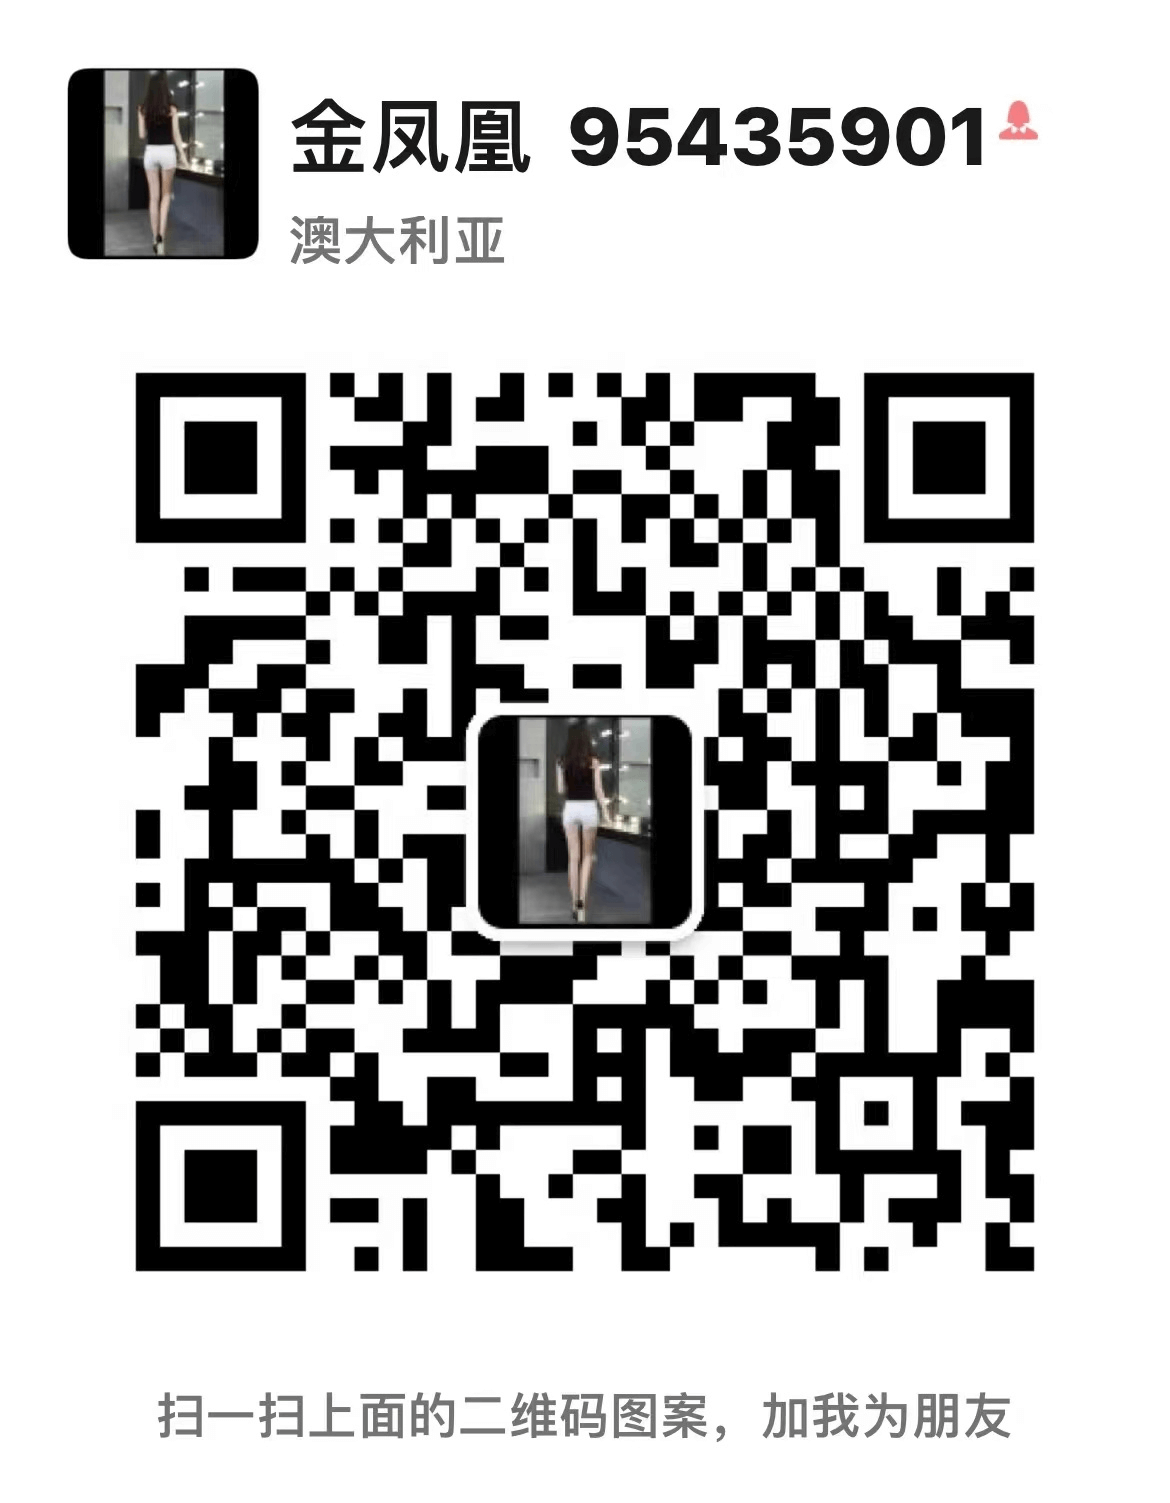 wechat code 2 for live chat 金凤凰二维码